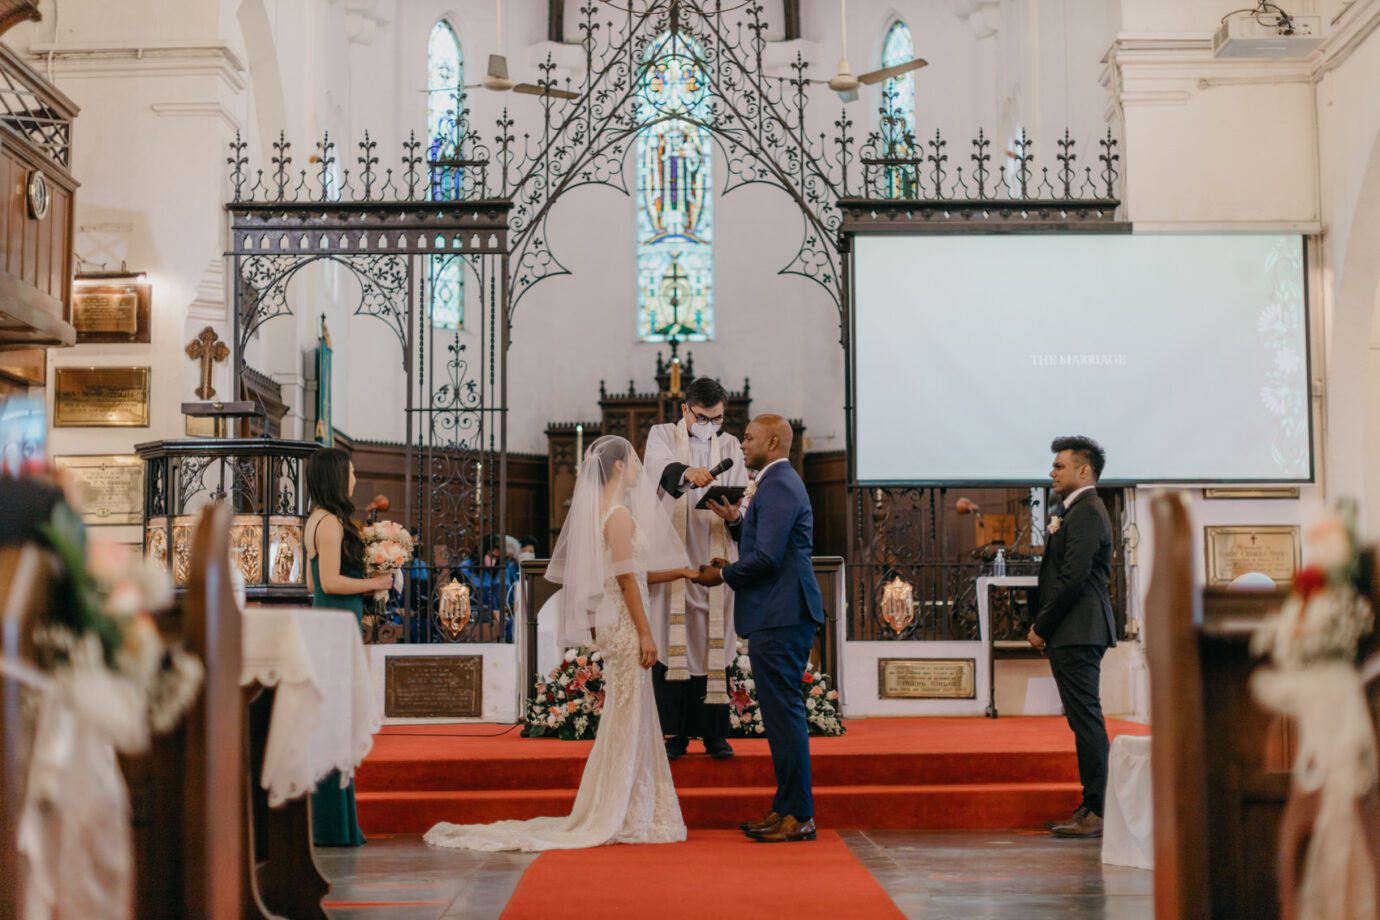 Exchange rings Janice and Christopher church wedding at St Mary's Cathedral Kuala Lumpur Love, democracy, and everlasting memories, Malaysia 15th General Election Day, Cliff Choong Photography